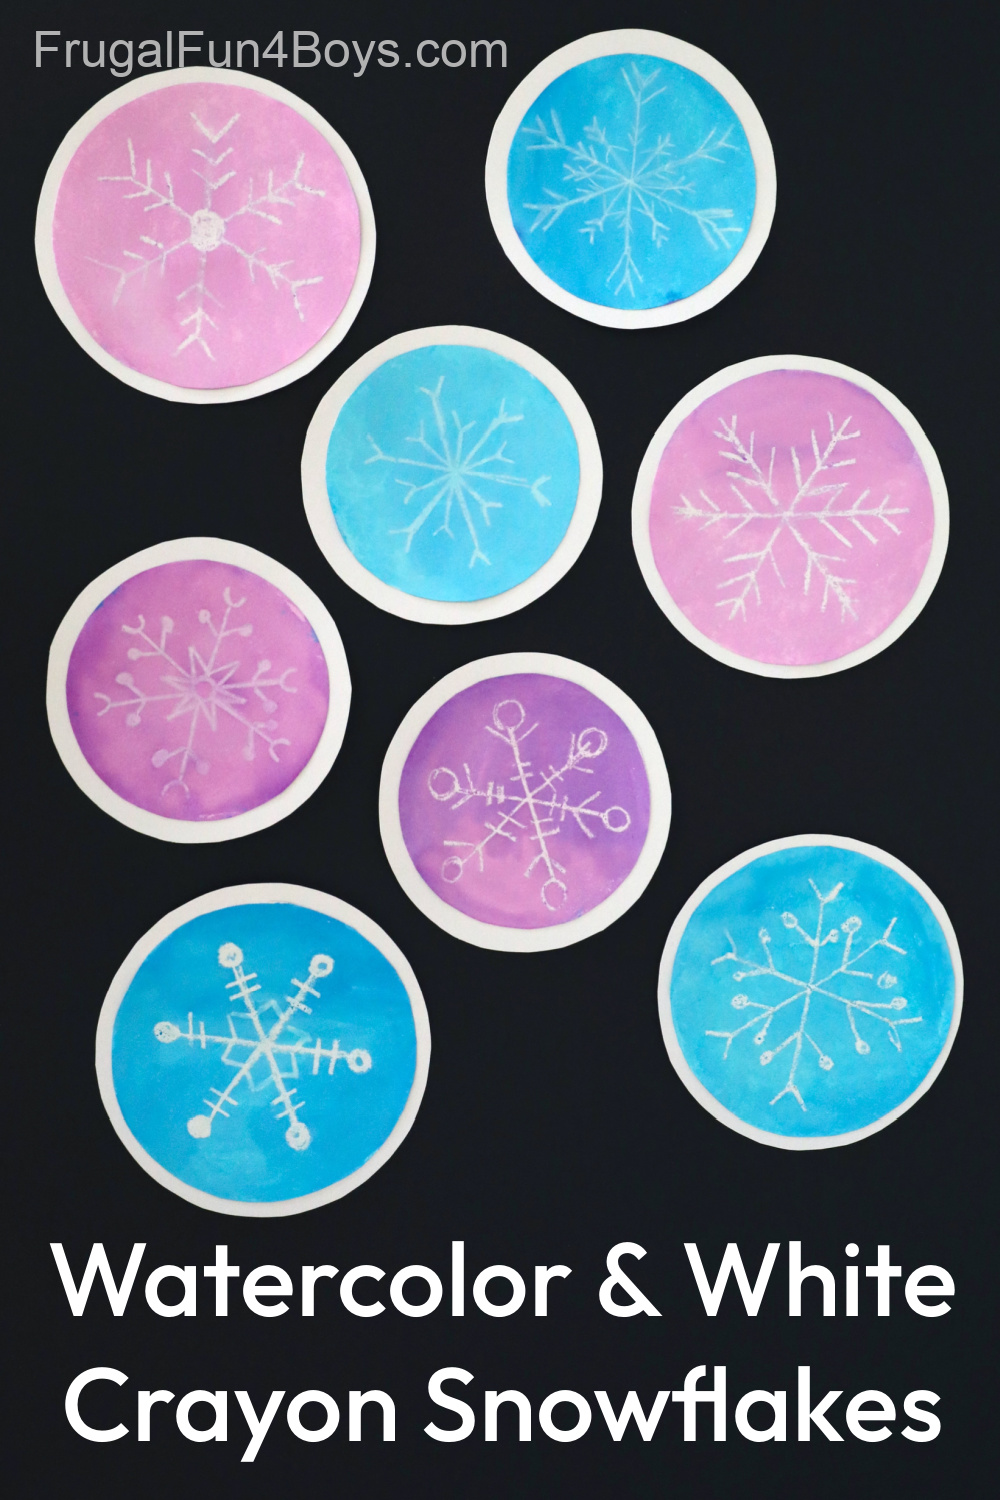 Watercolor and white crayon snowflakes